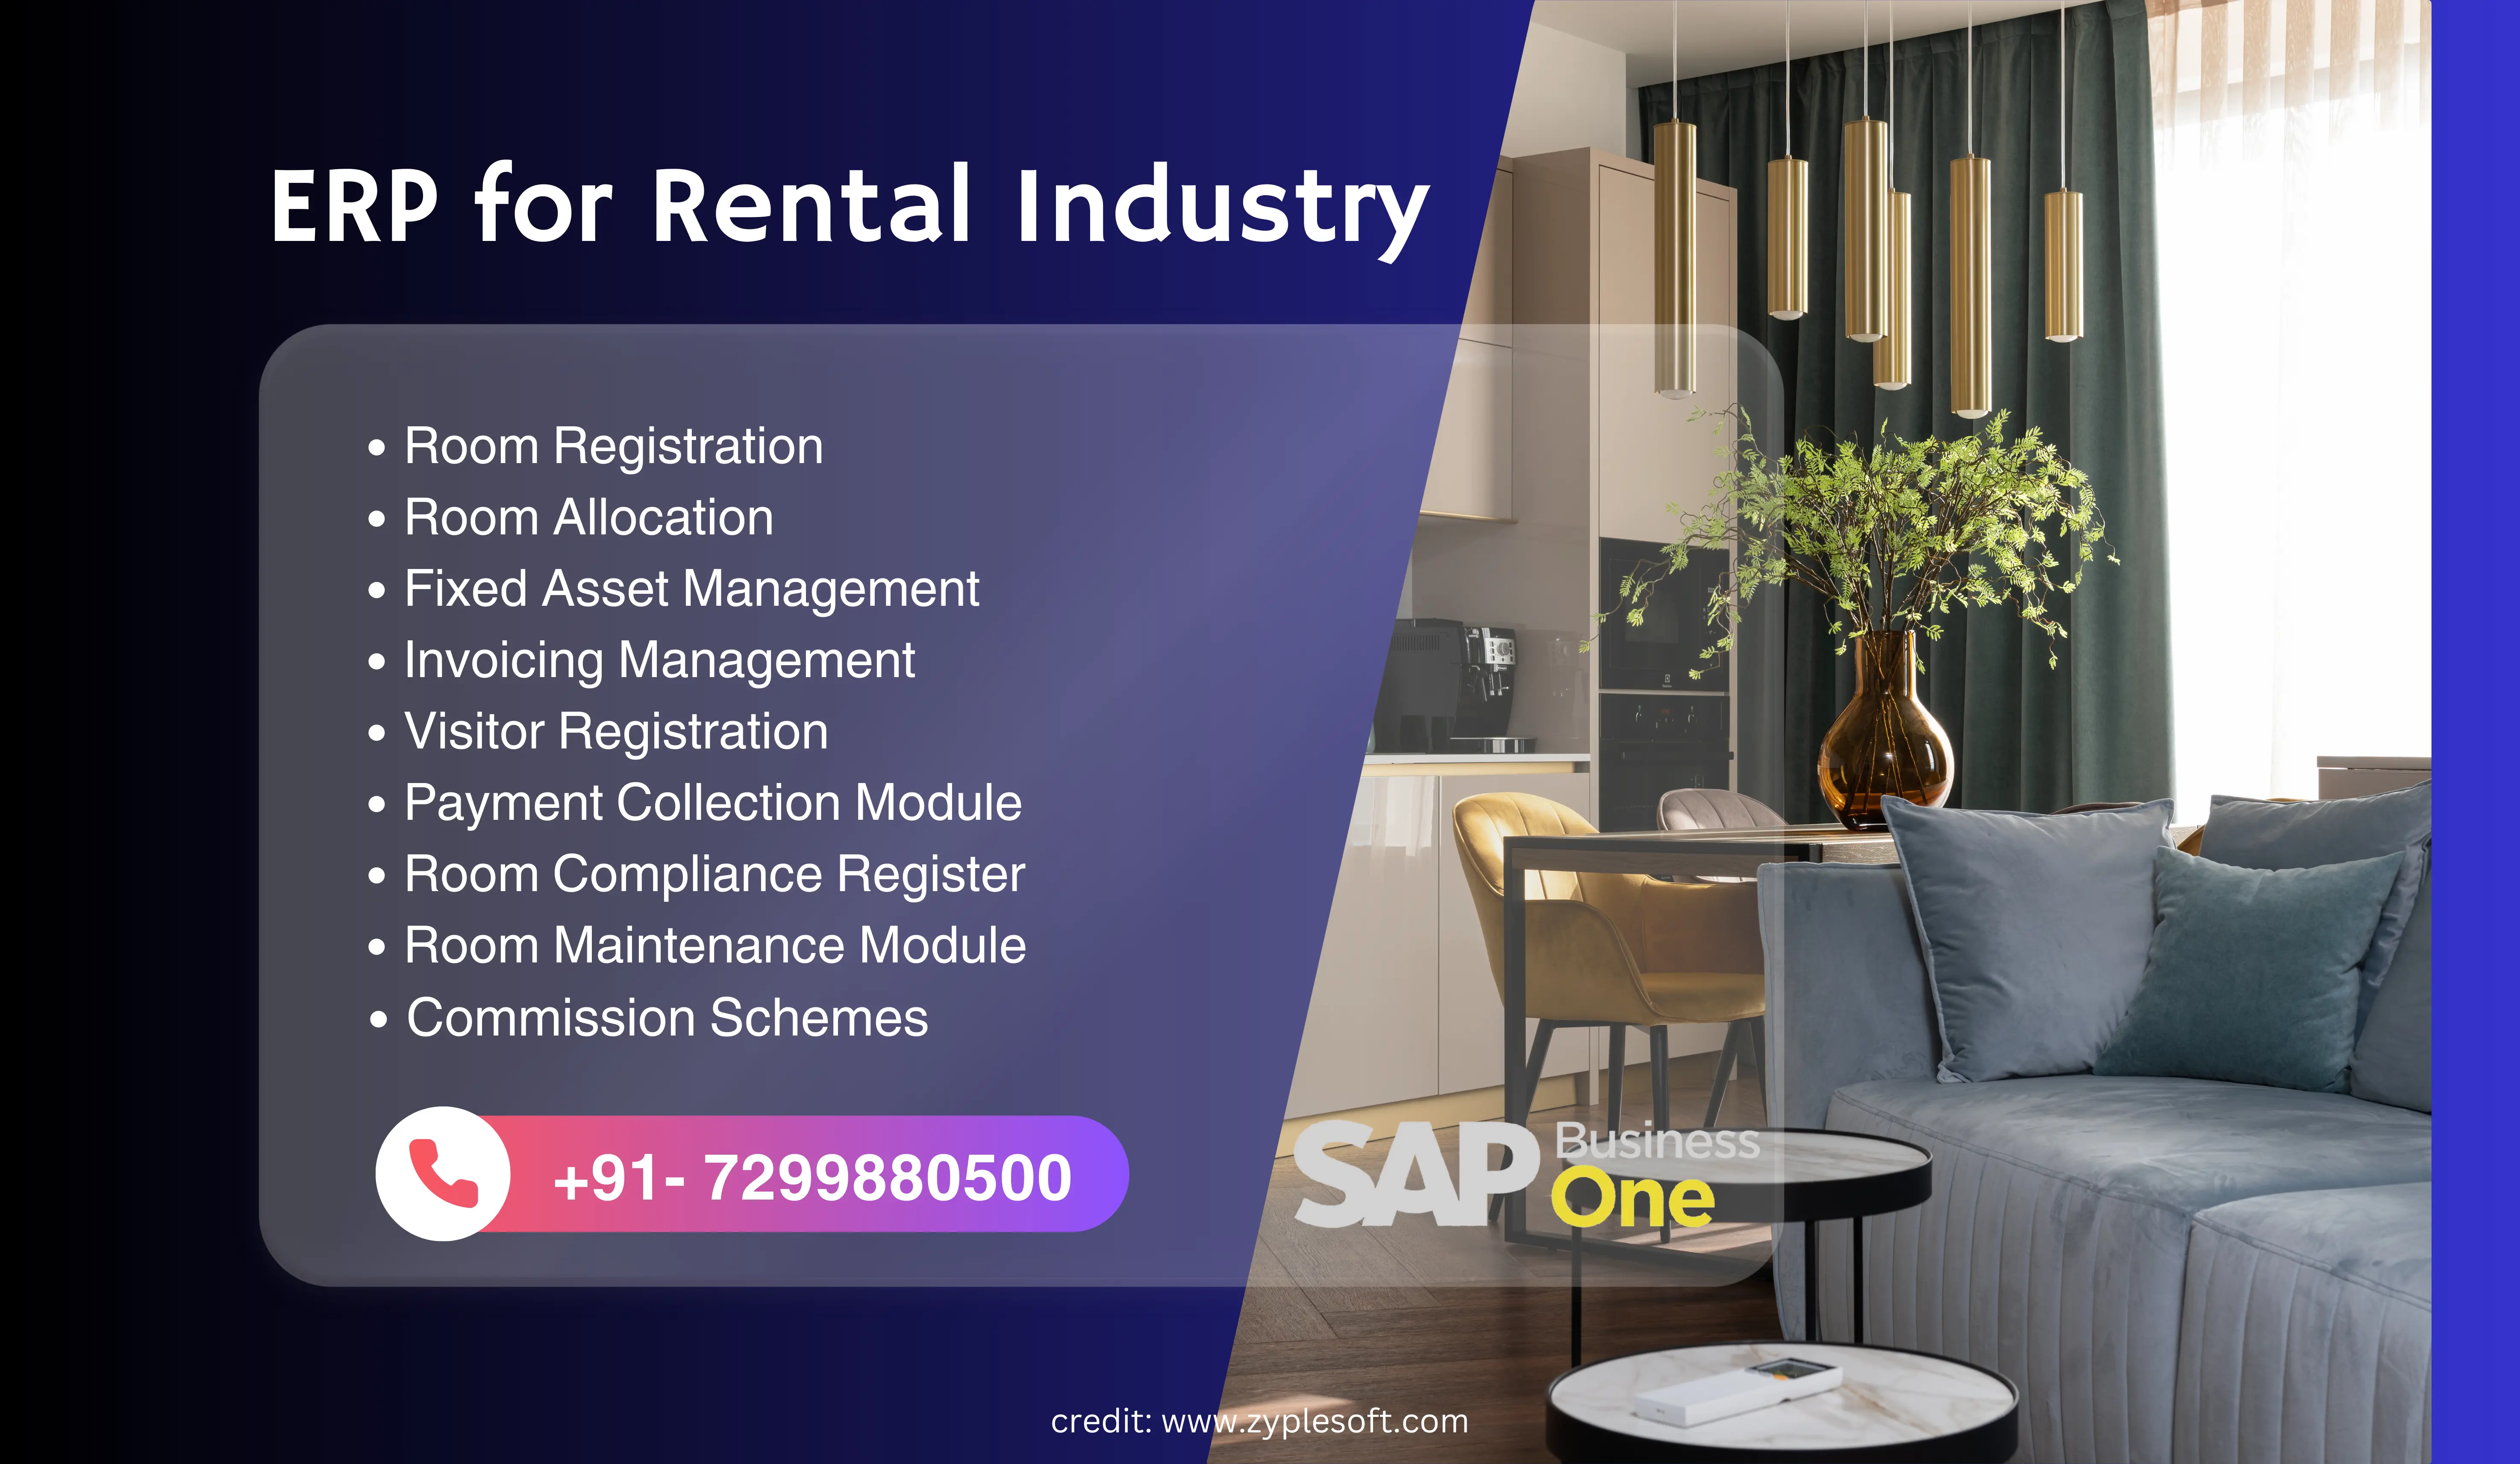 SAP Business One ERP for Rental industry